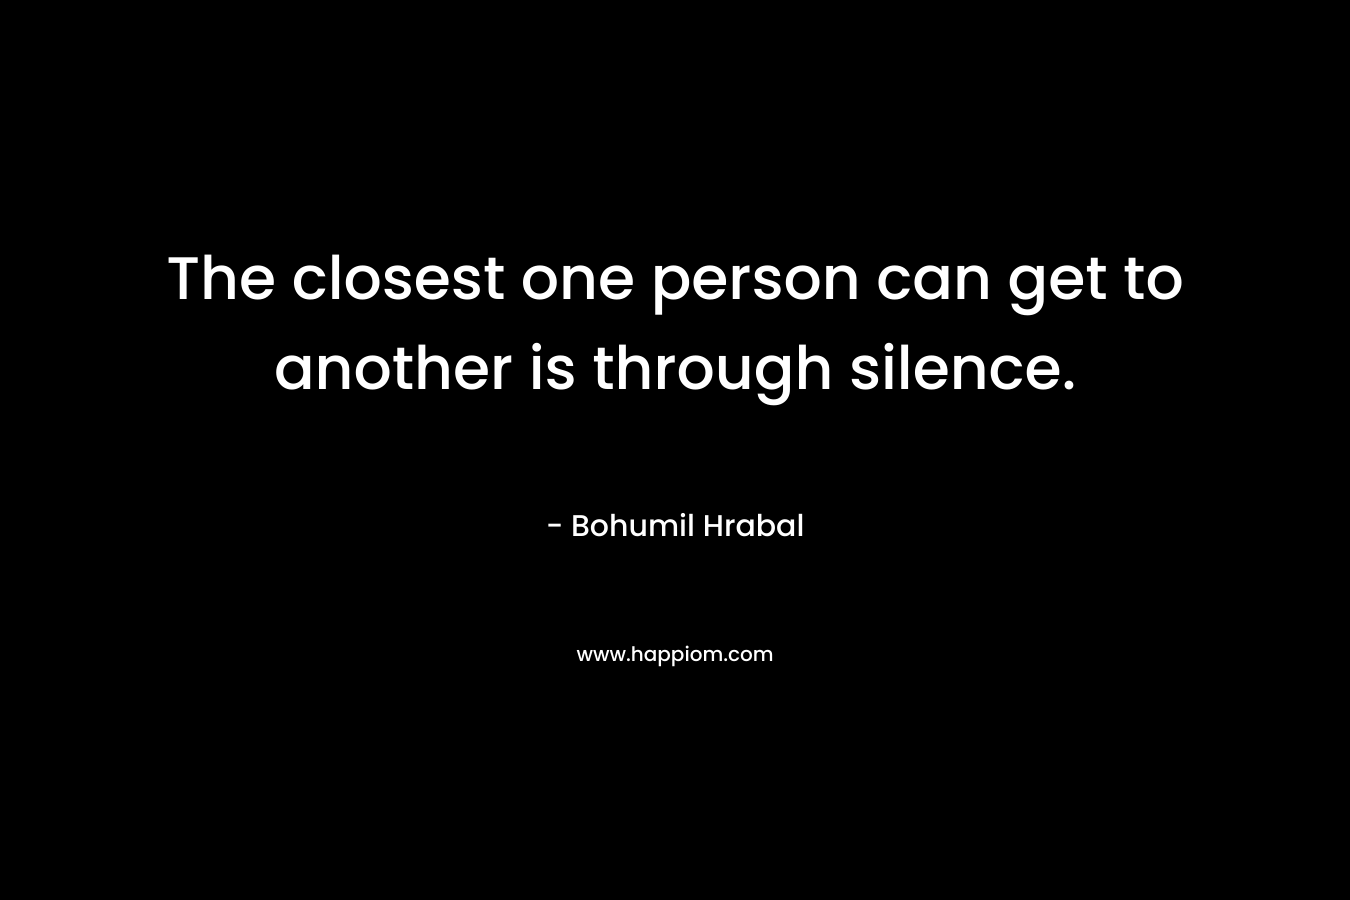 The closest one person can get to another is through silence. – Bohumil Hrabal